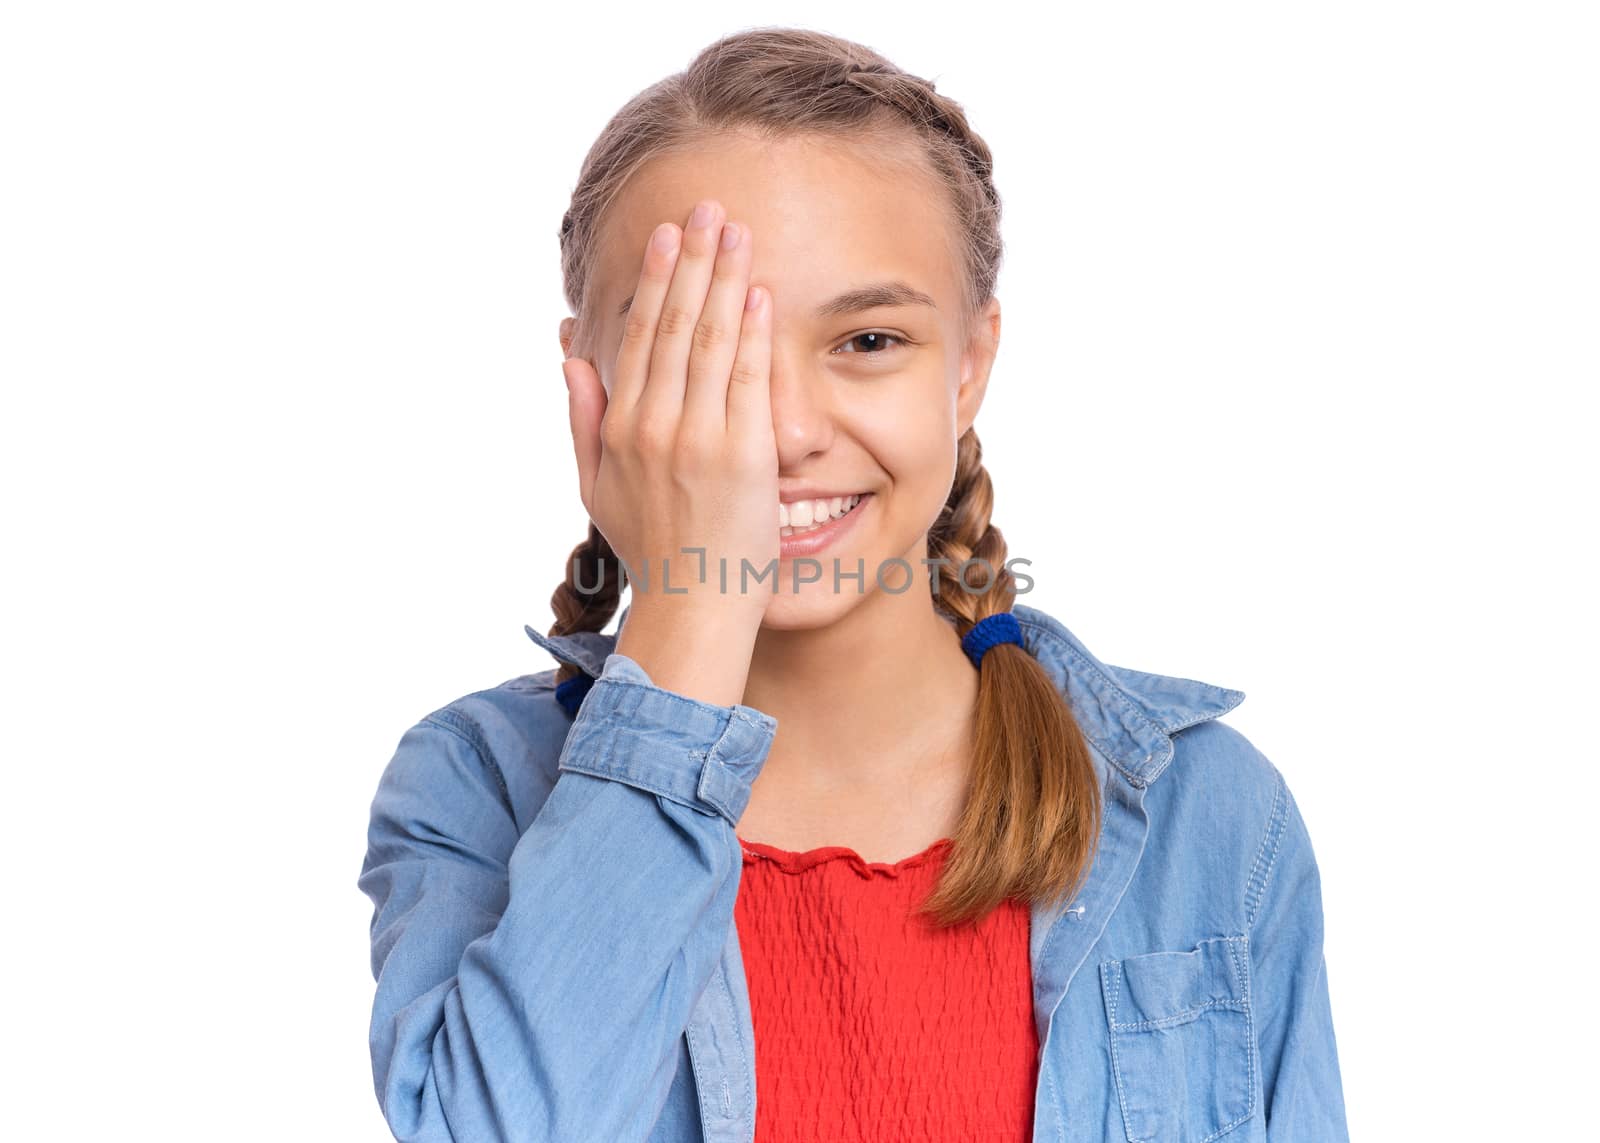 Happy teenage girl looks with one eye while covering his other eye with his hand, isolated on white background